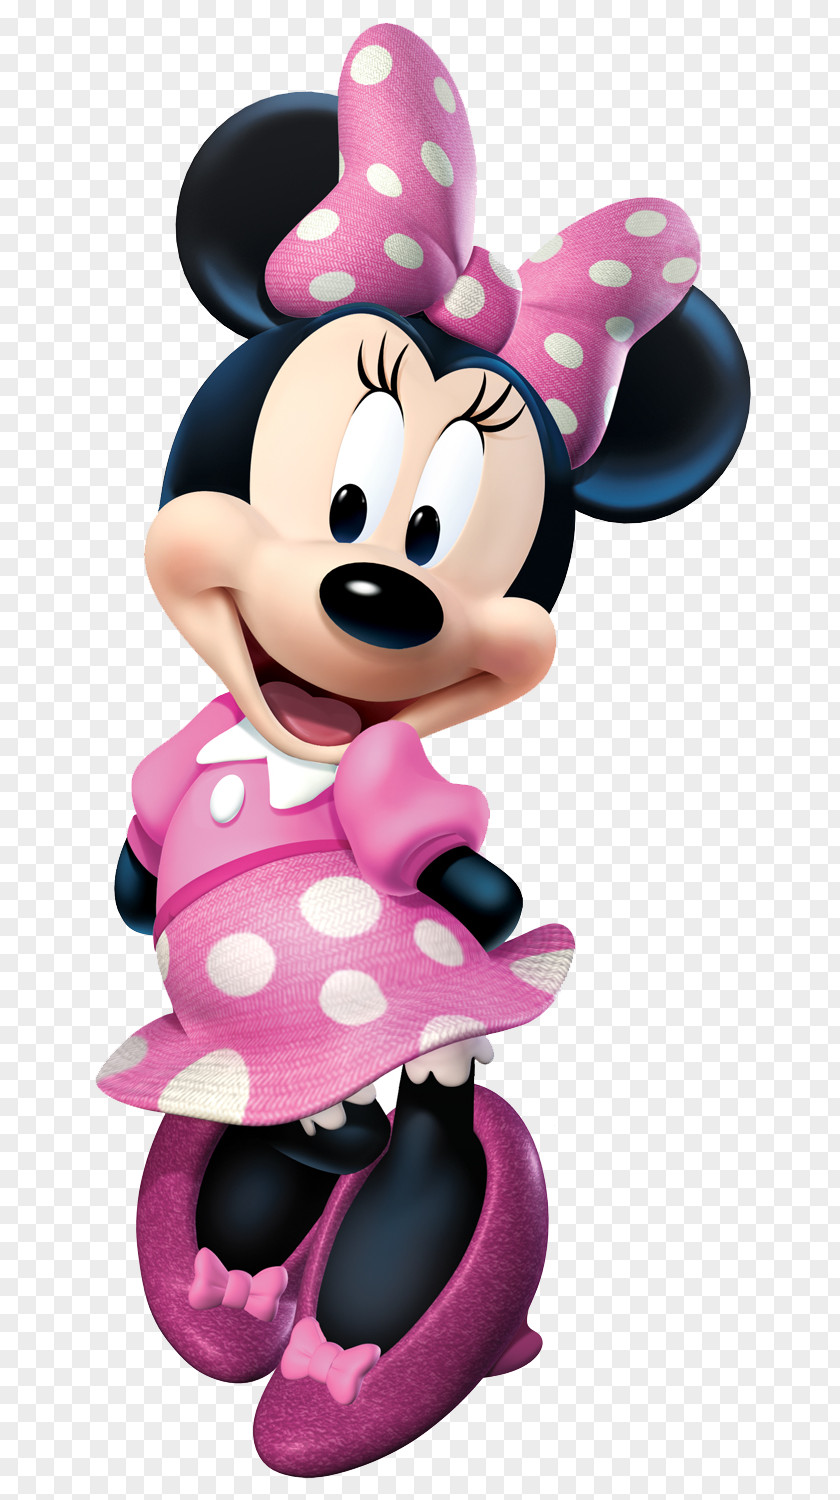 MINNIE Minnie Mouse Mickey The Gleam Clip Art PNG